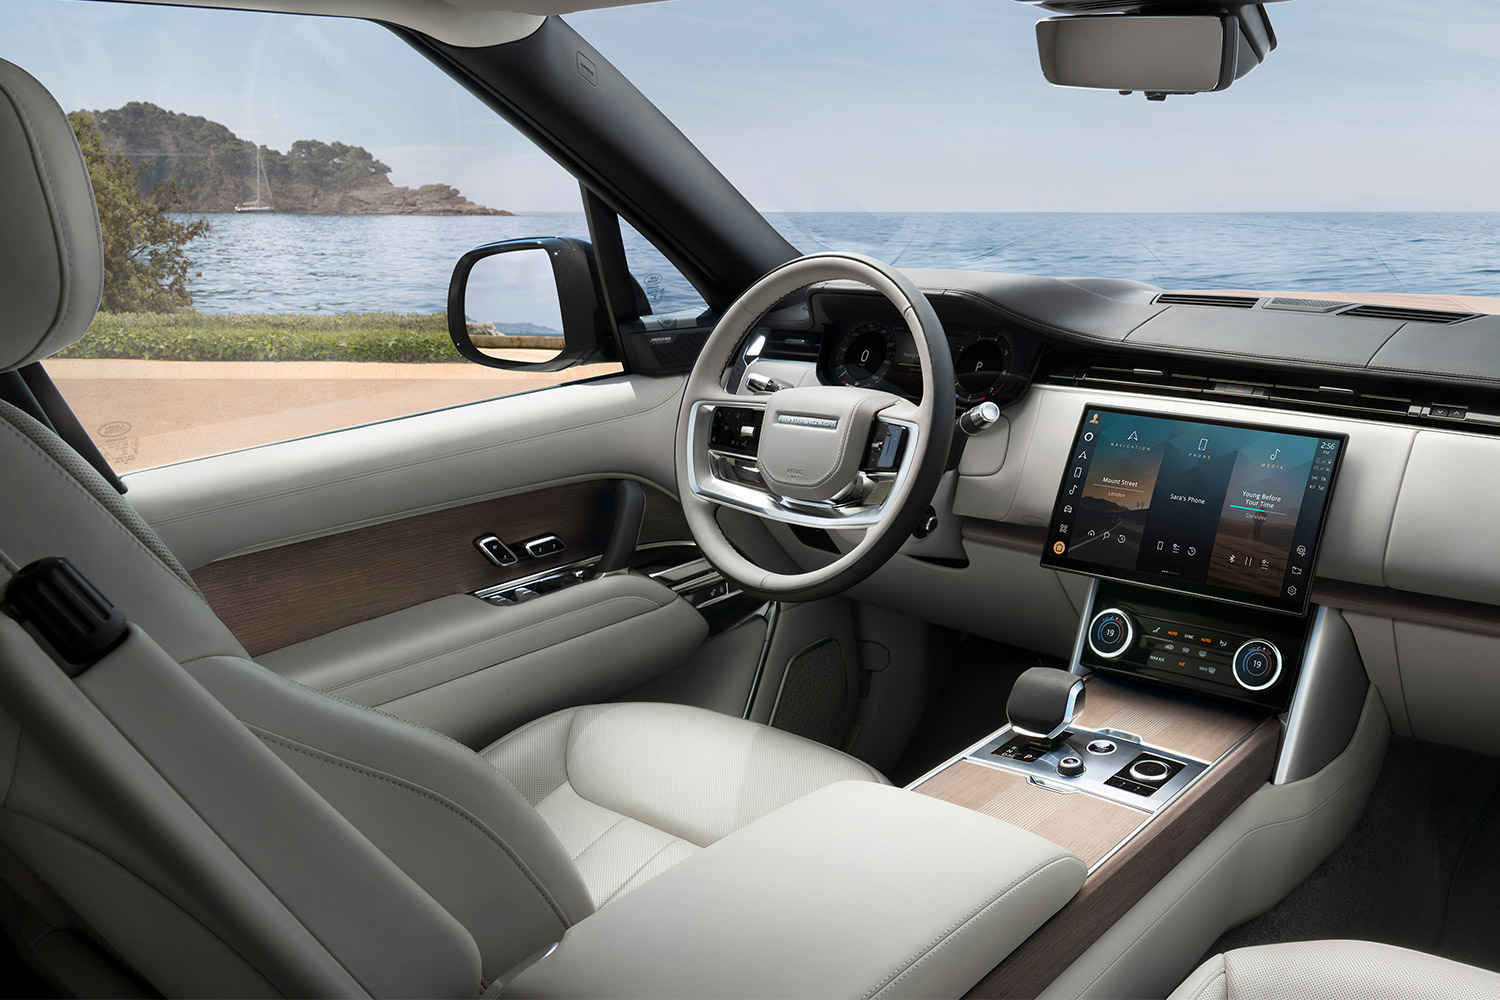 The front seat of the 2023 Range Rover